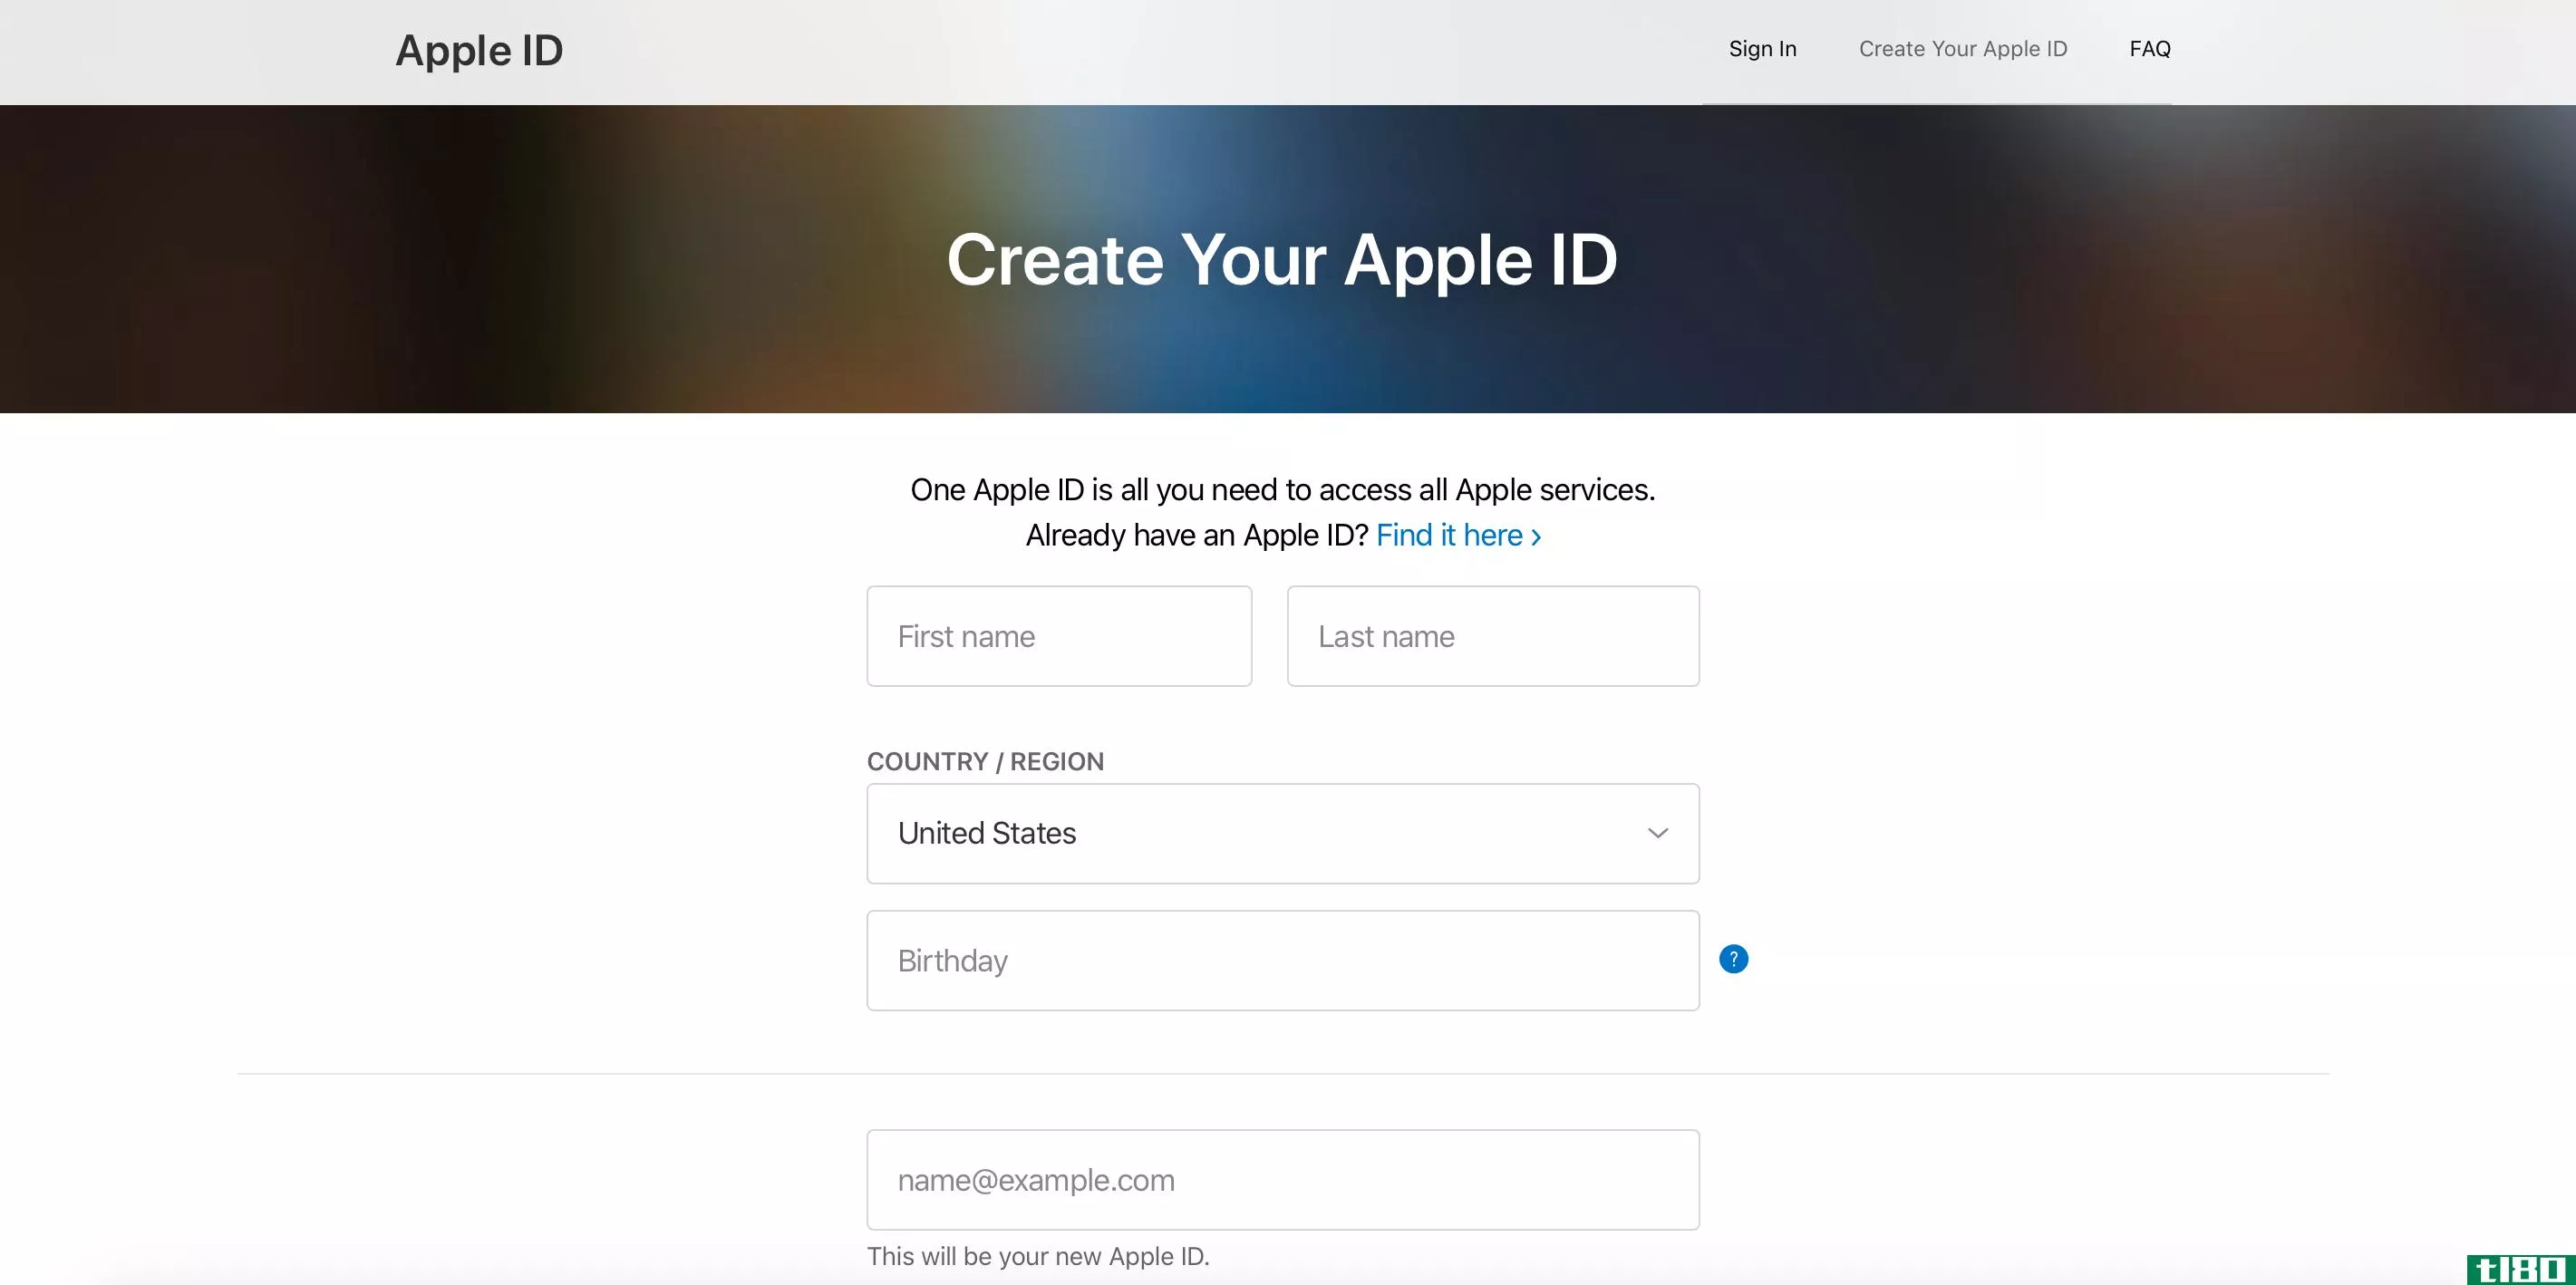 creating an Apple ID on the web from any device